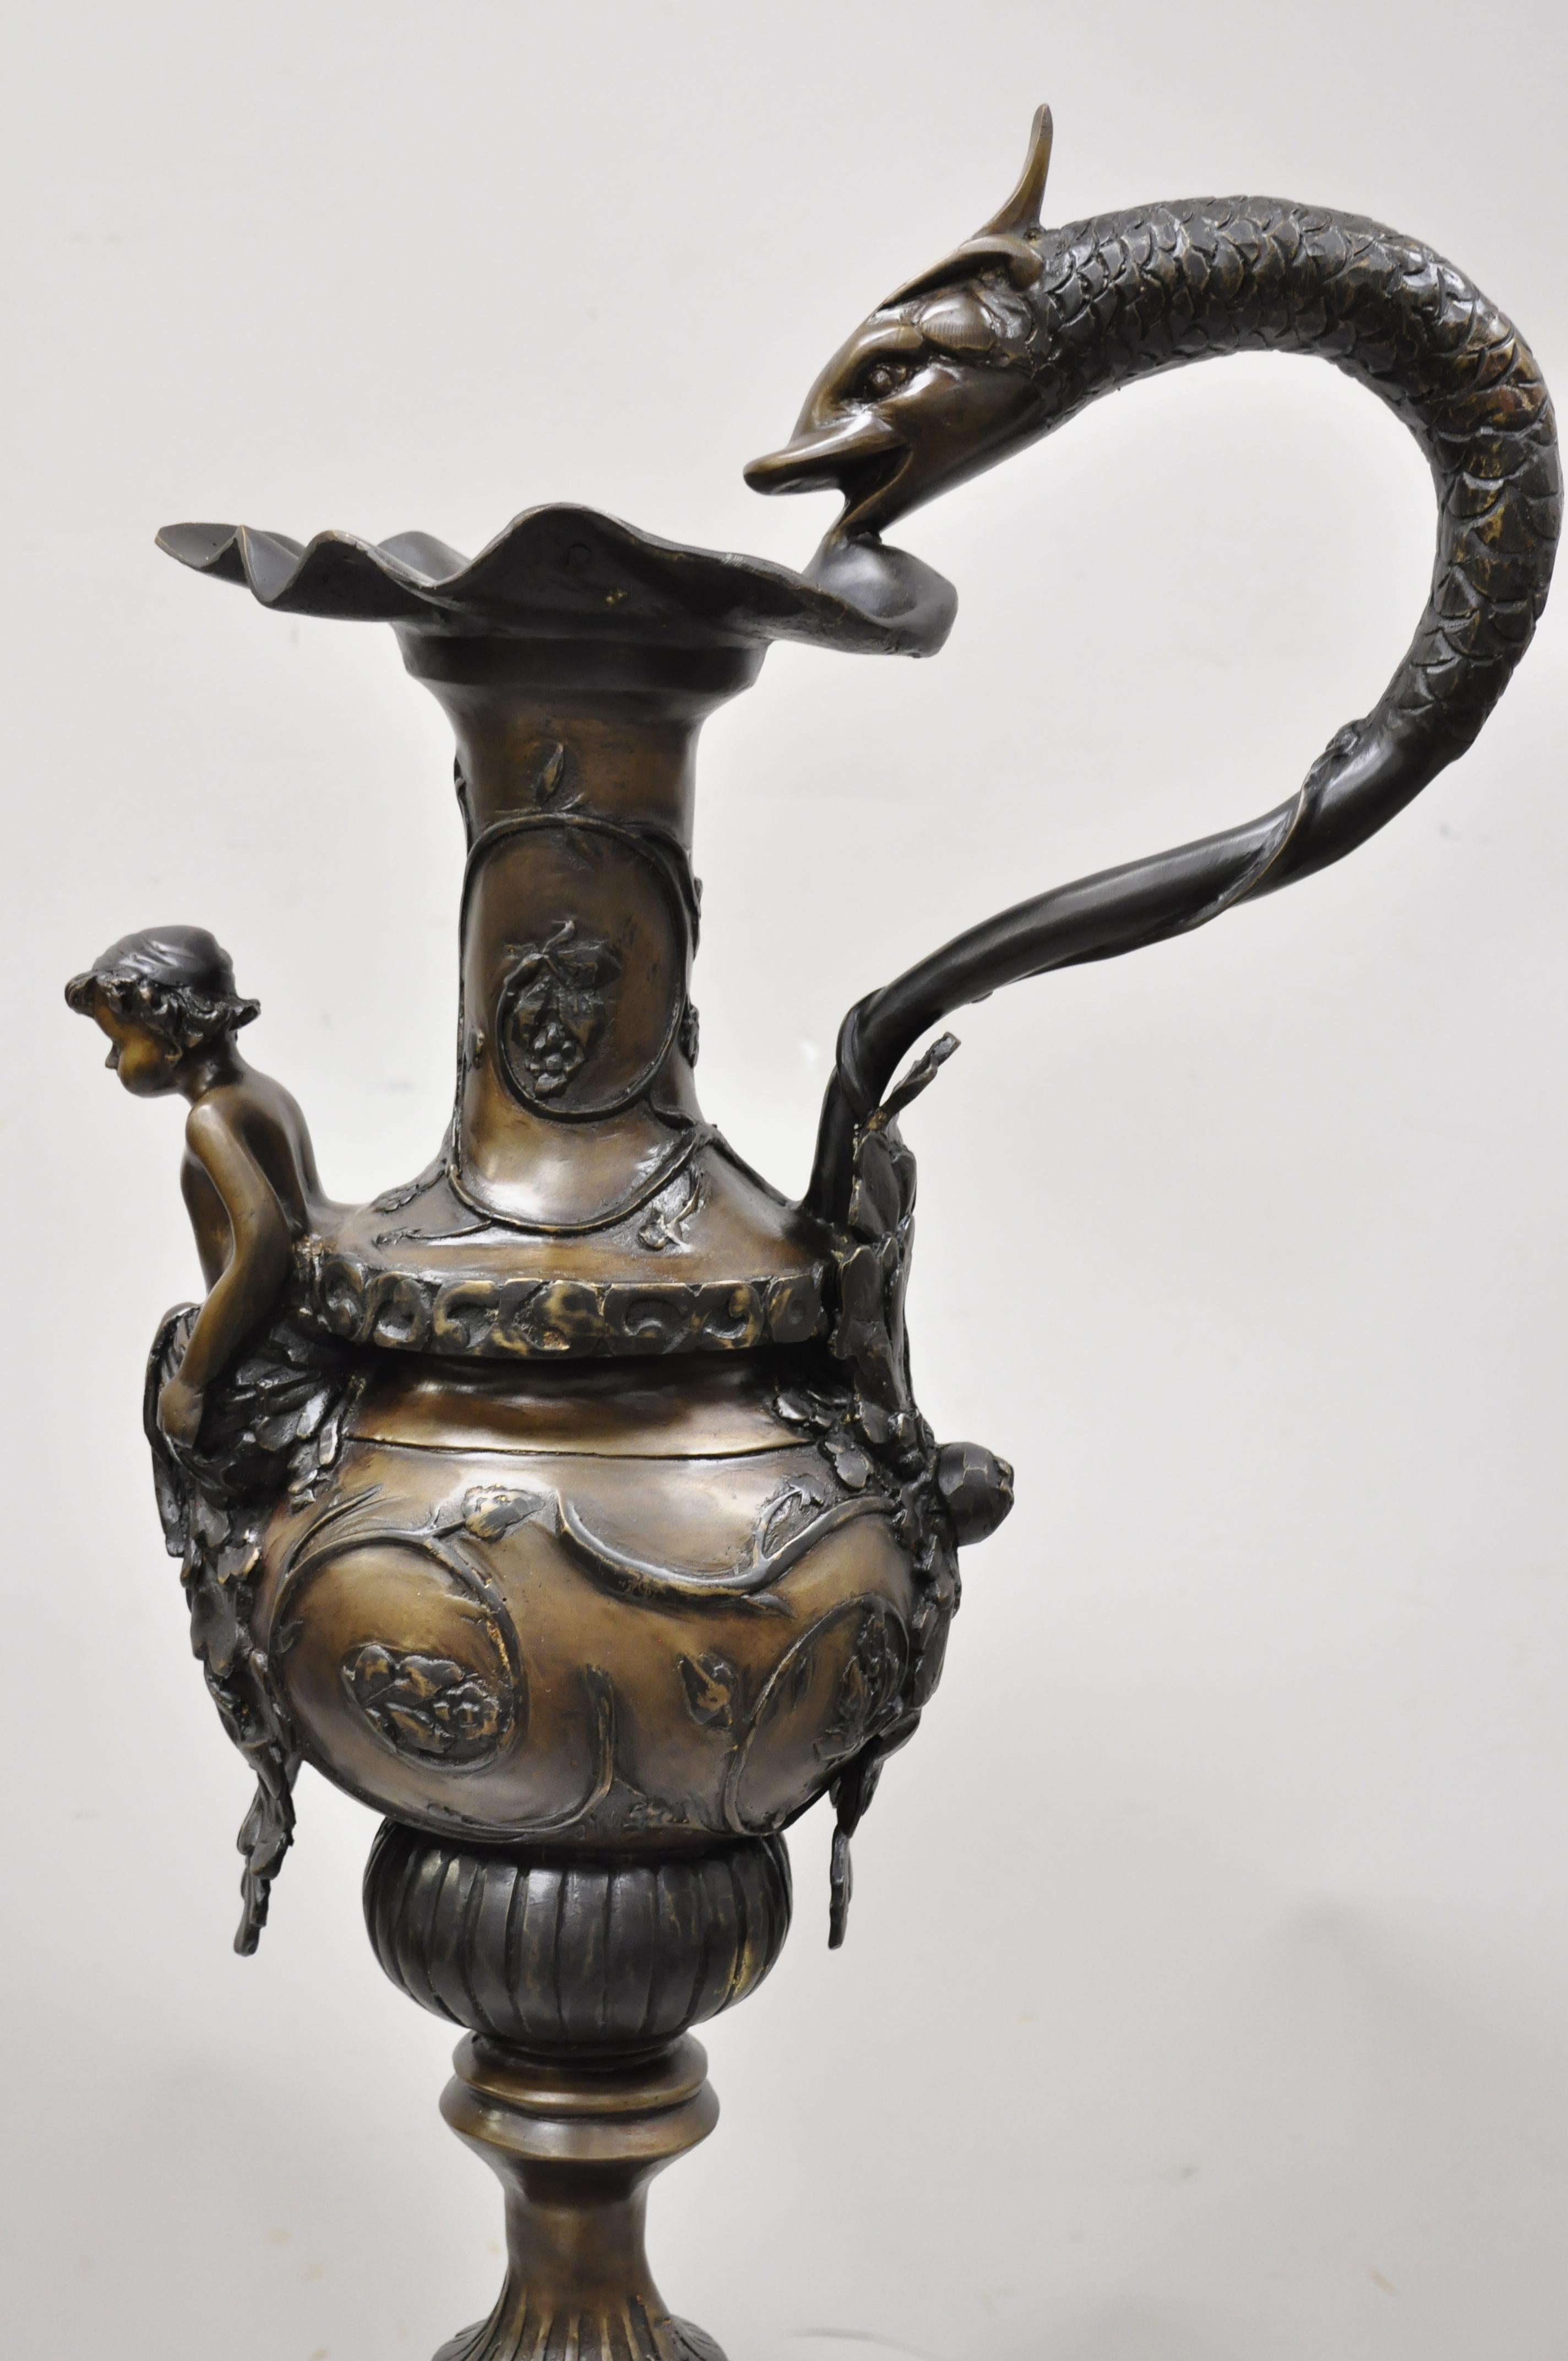 20th century French Empire style large figural bronze urn ewer vase with cherub. Item features a serpent handle, seated cherub, large impressive size, great style and form. Weighs approximate 30 lbs, circa late 20th-21st century. Measurements: 31